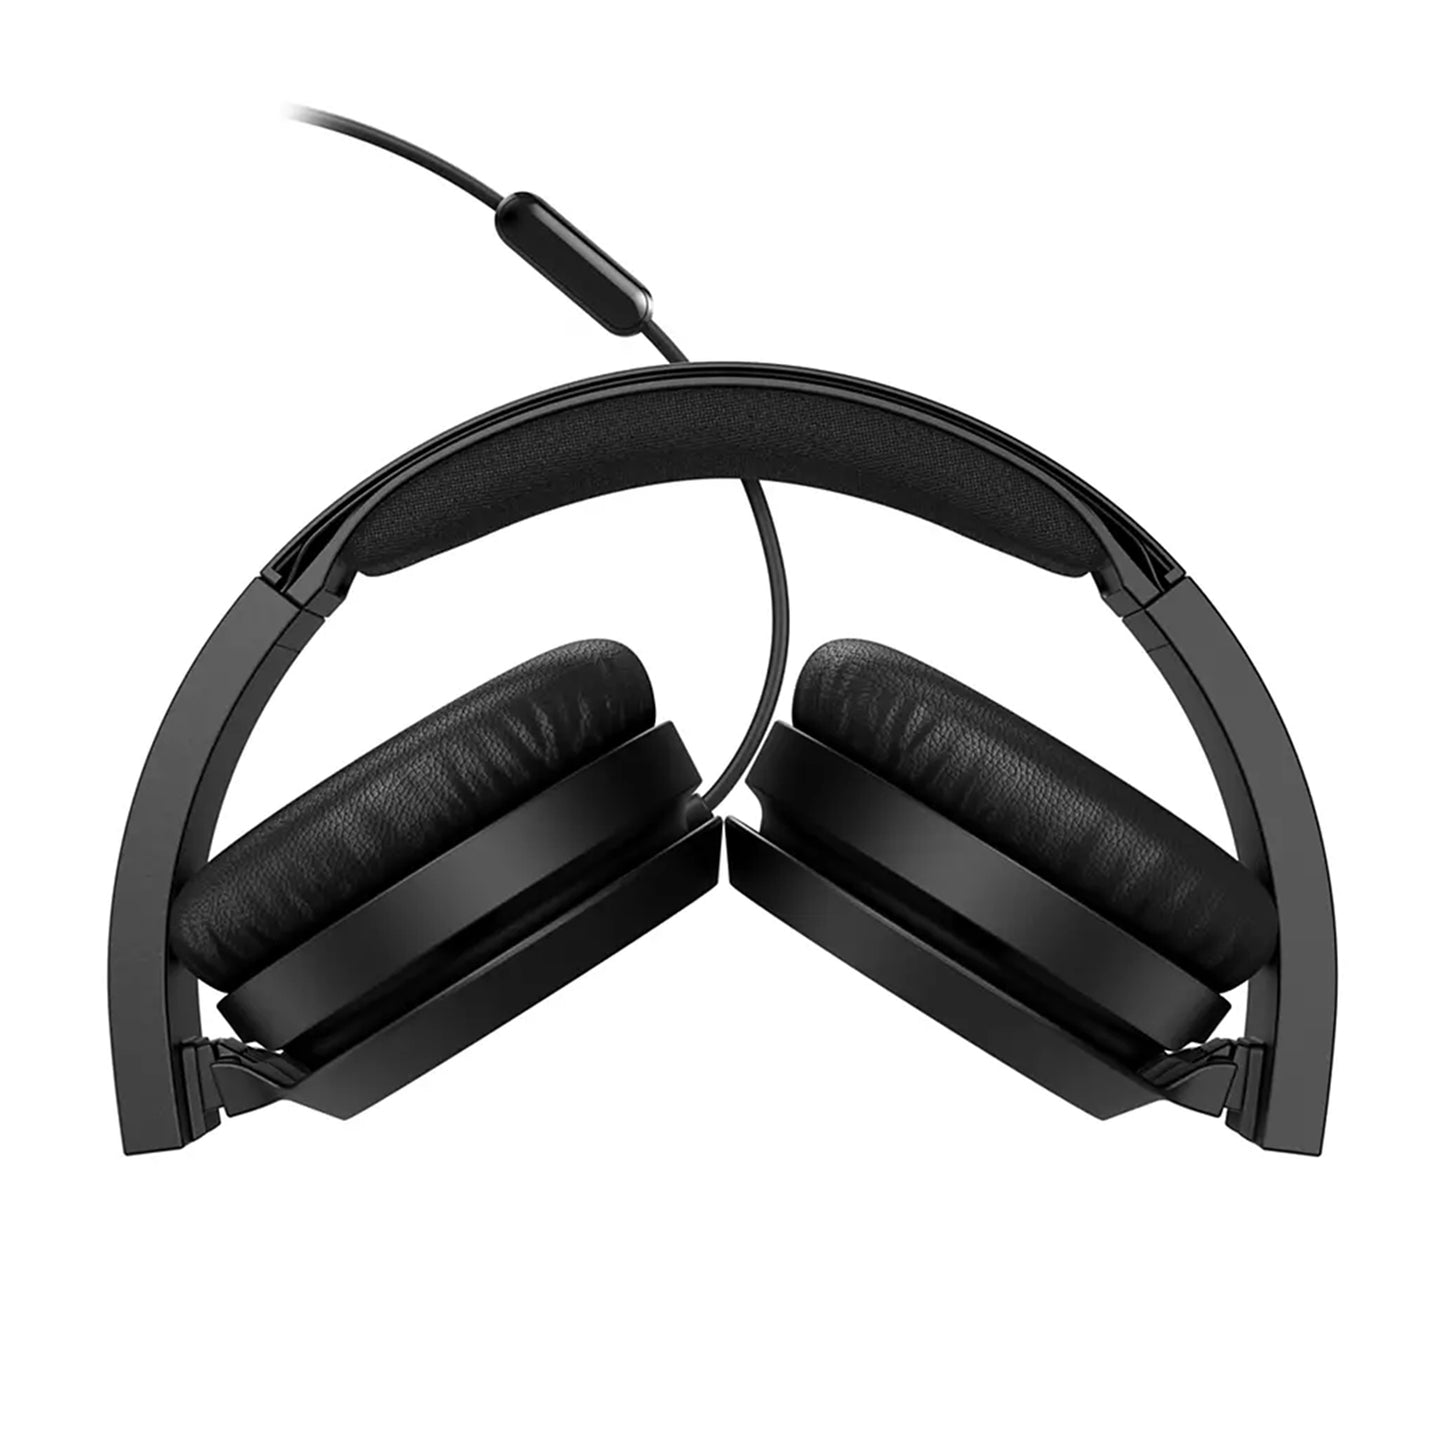 PHILIPS Arched on-ear headphones with cable, deep bass and defined highs, foldable headphones with integrated microphone